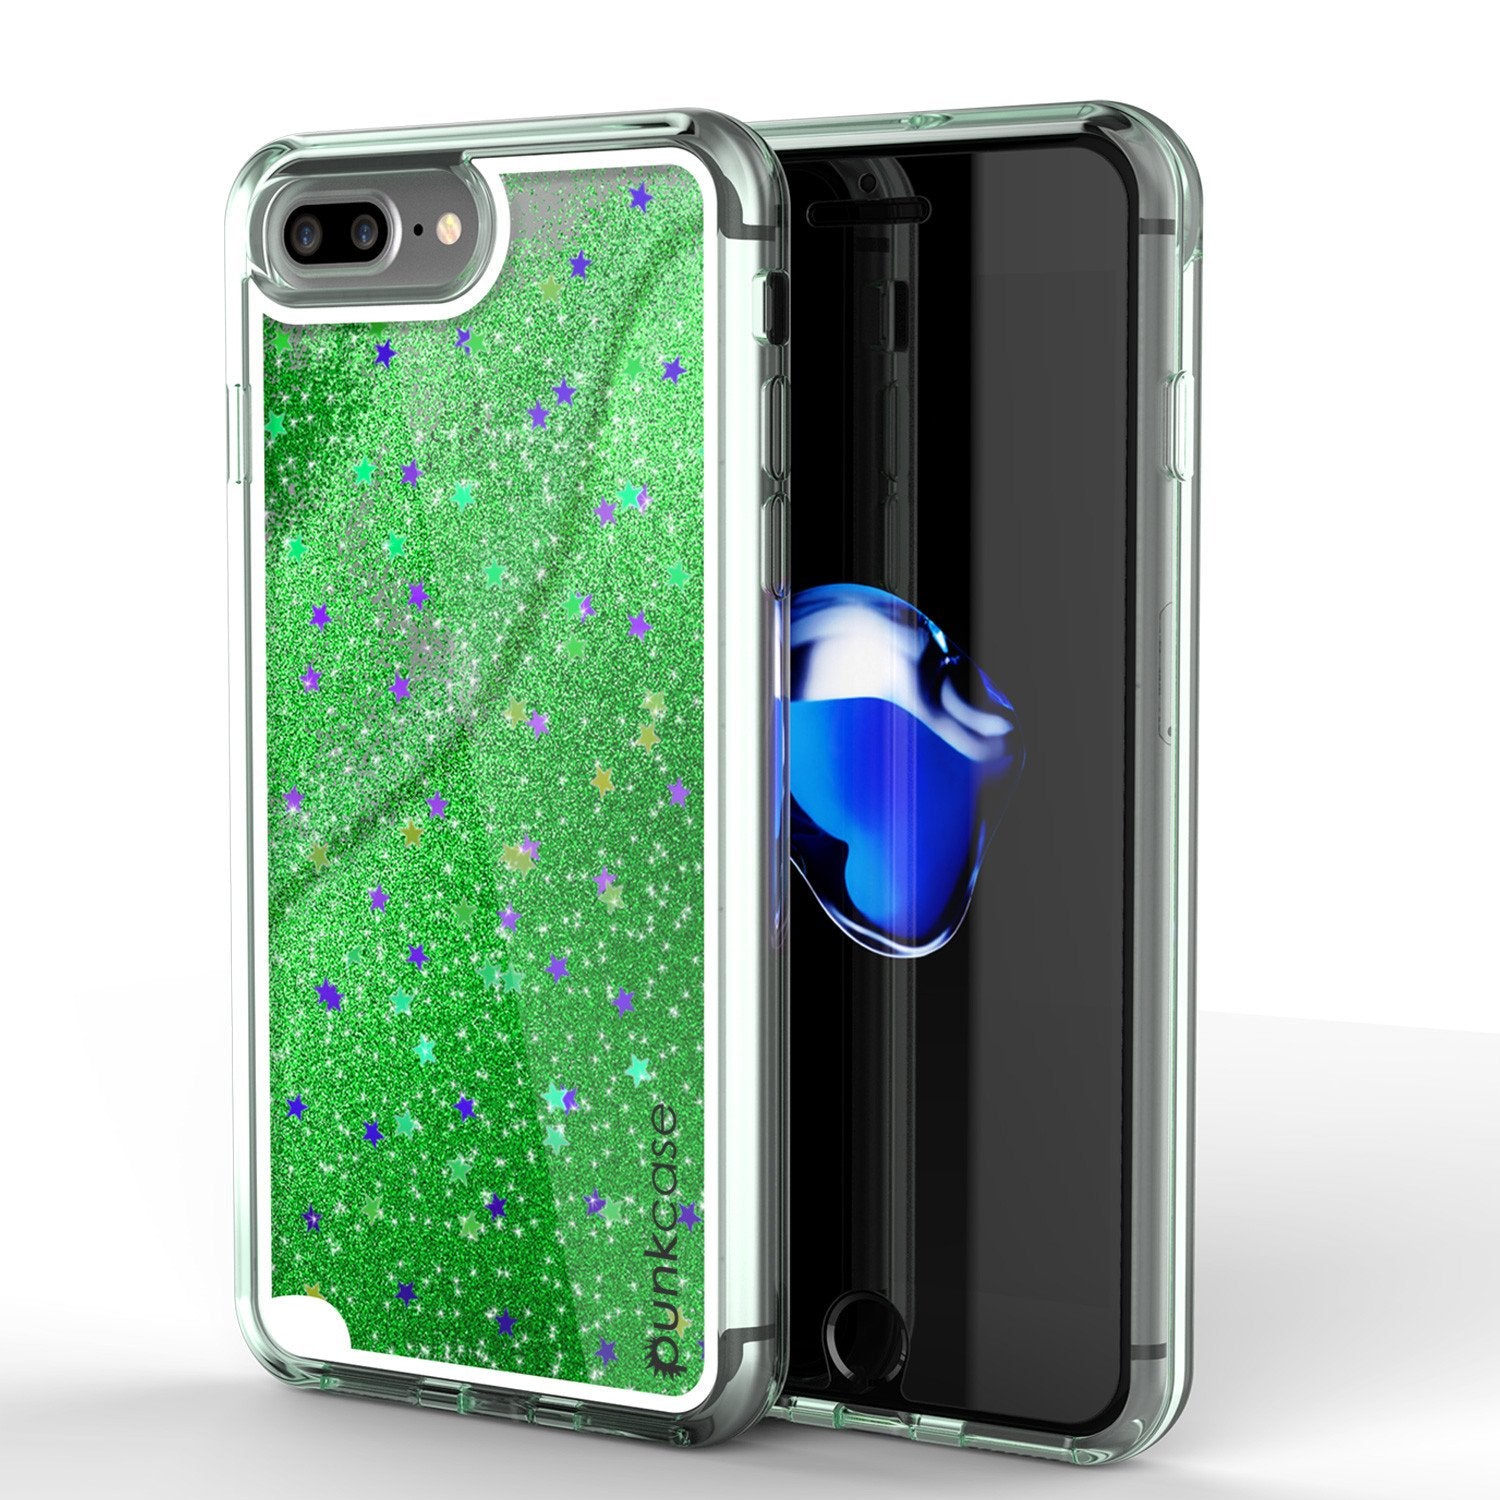 iPhone 7+ Plus Case, PunkCase LIQUID Green Series, Protective Dual Layer Floating Glitter Cover